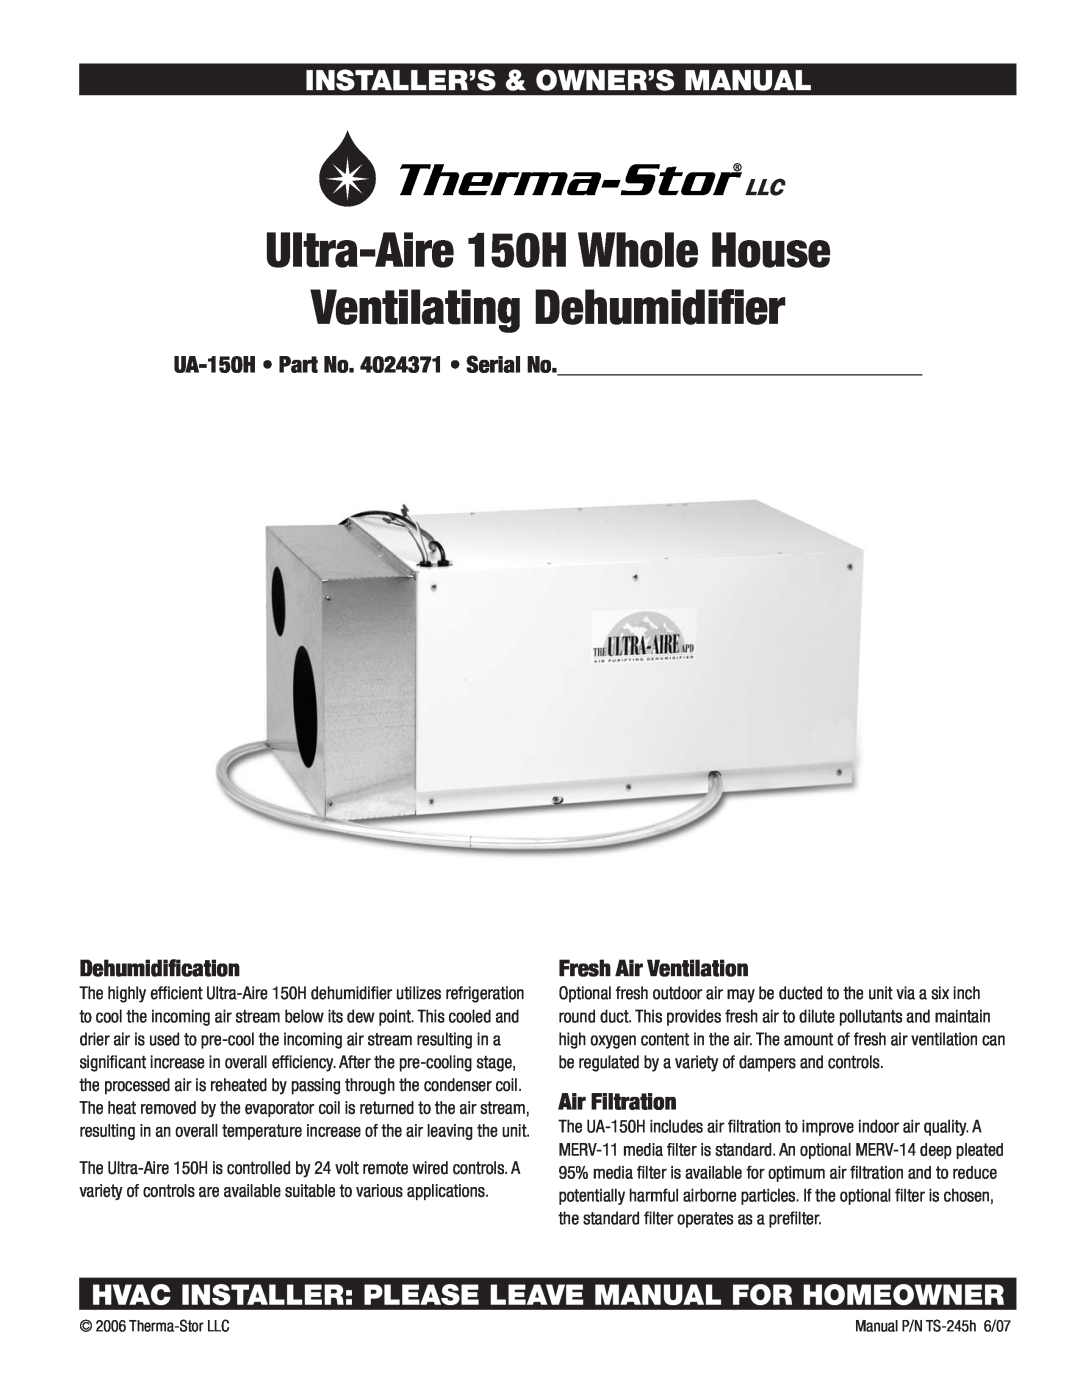 Therma-Stor Products Group UA-150H owner manual Hvac Installer Please Leave Manual For Homeowner, Ventilating Dehumidifier 